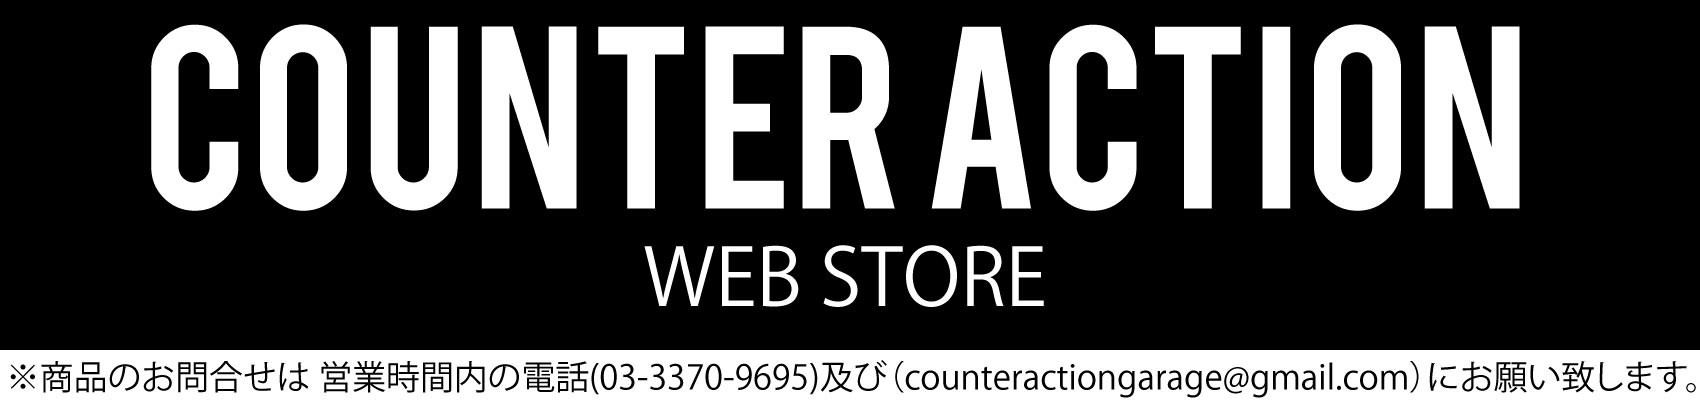 COUNTER ACTION WEB-STORE